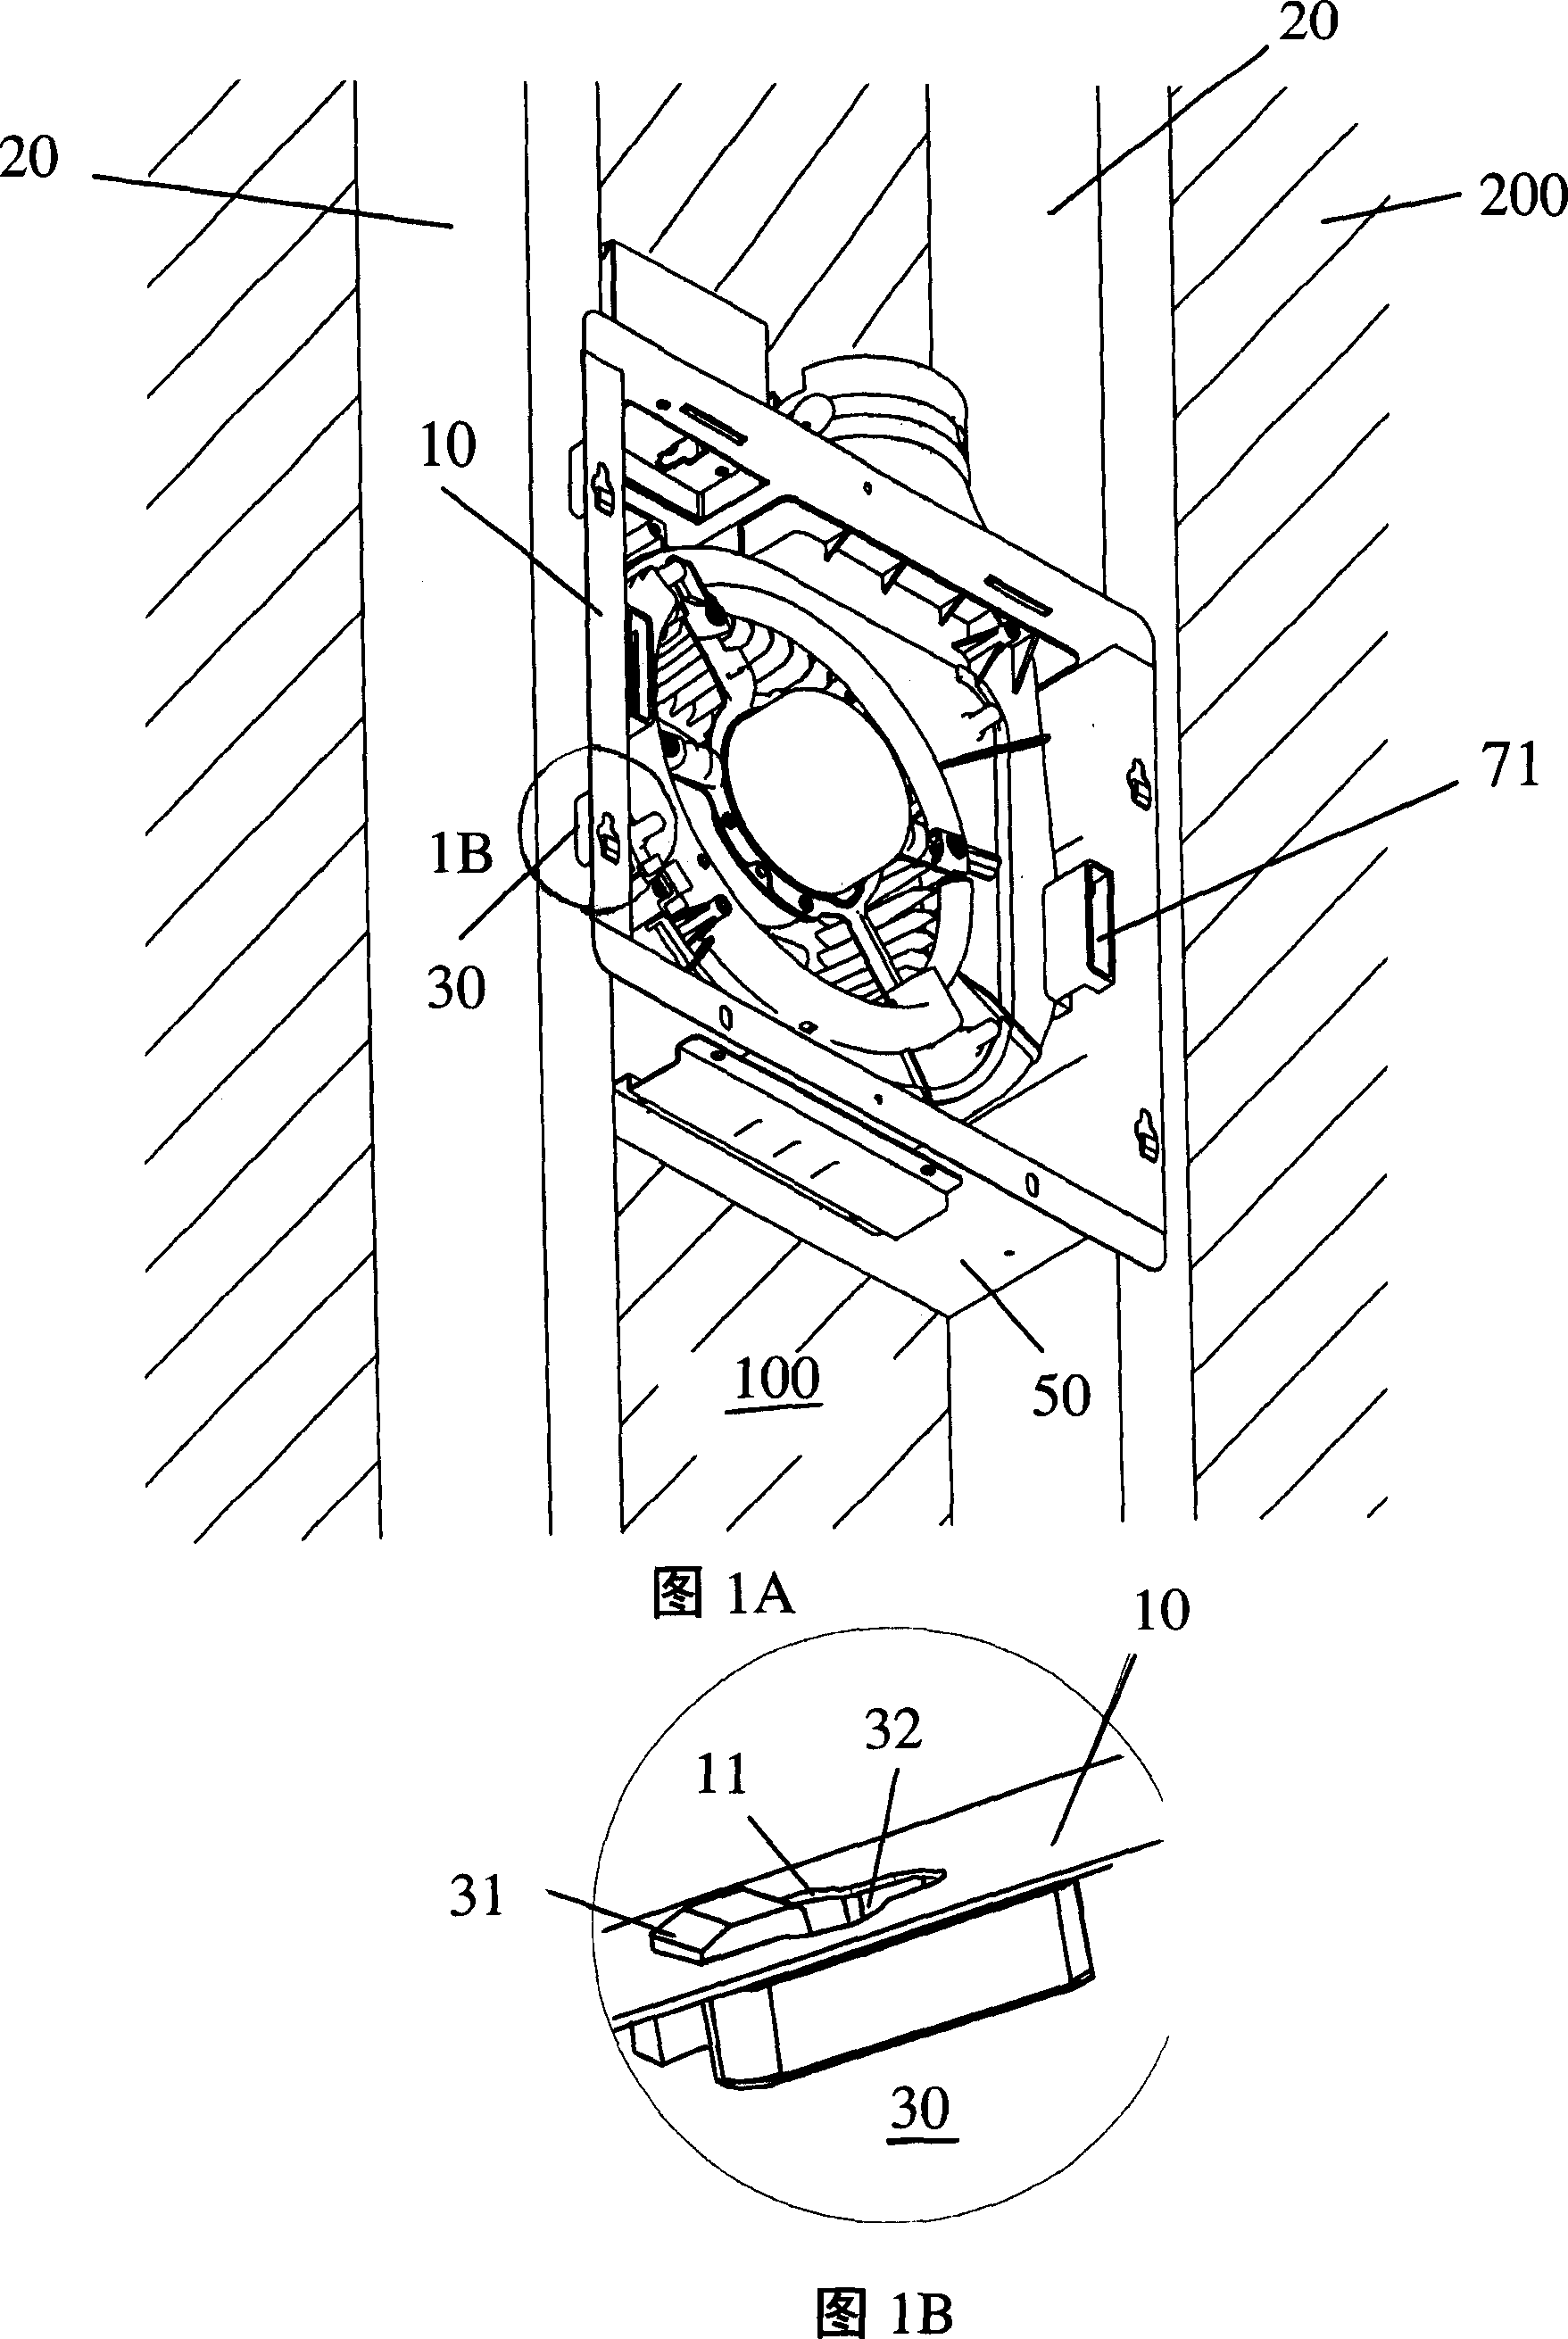 Fixed structure for installing ventilation fan